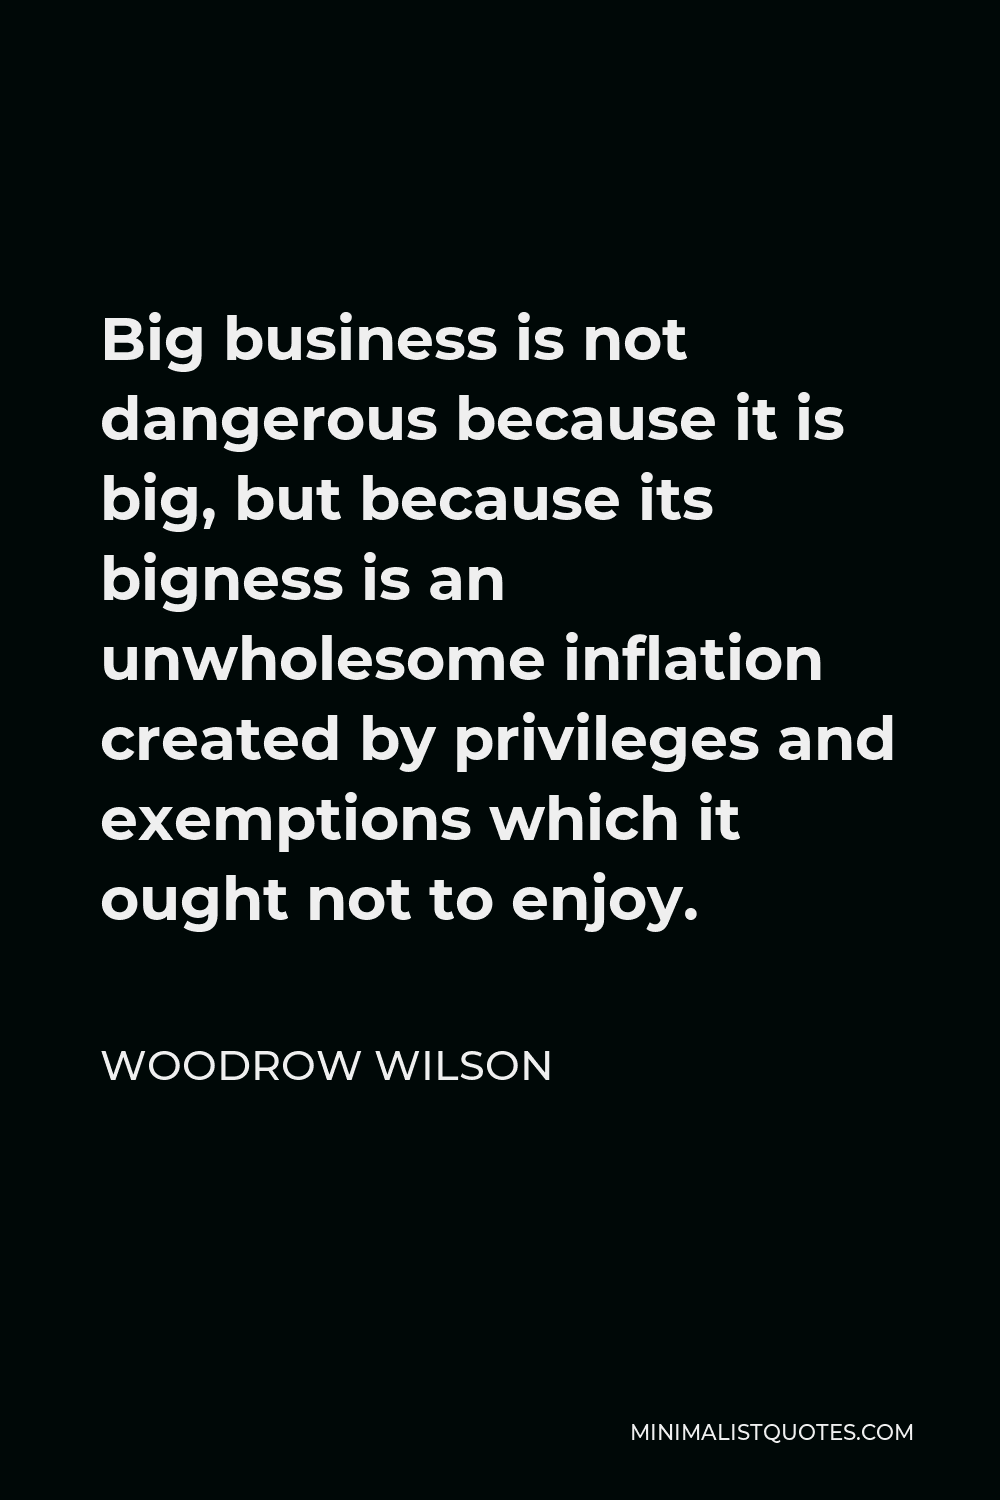 Woodrow Wilson Quote - Big business is not dangerous because it is big, but because its bigness is an unwholesome inflation created by privileges and exemptions which it ought not to enjoy.